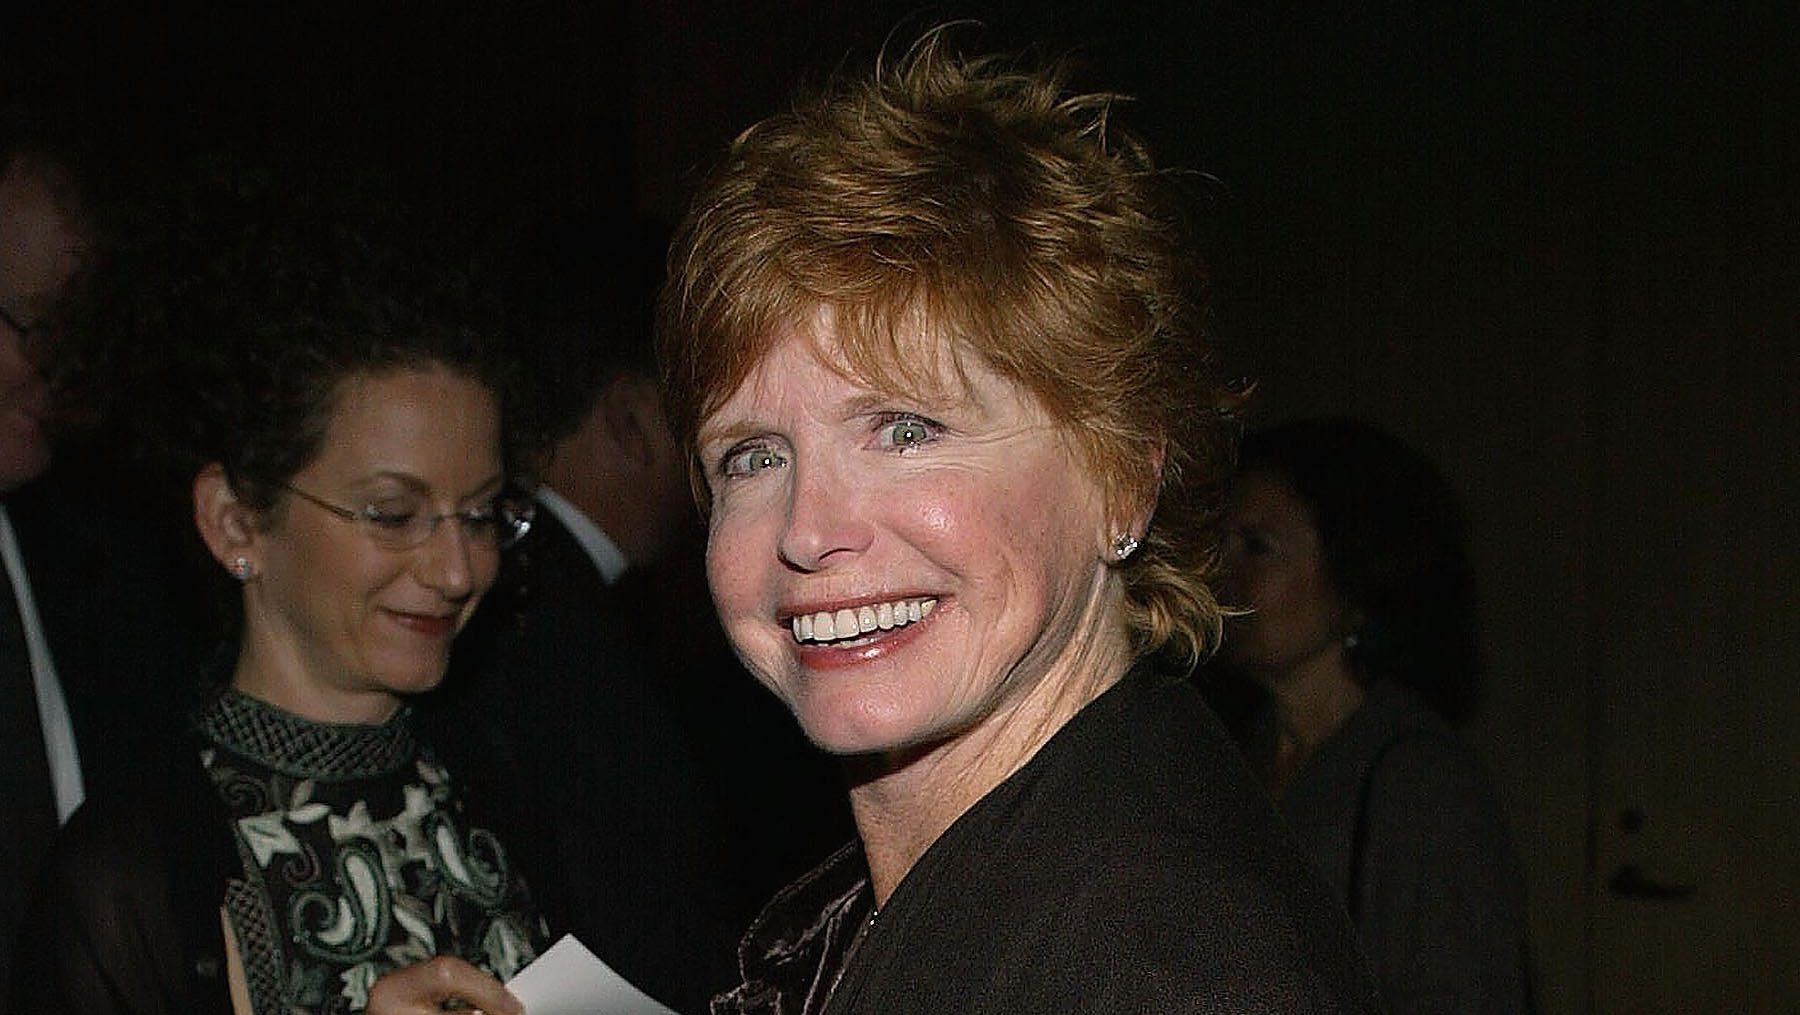 The 'One Day at a Time' actress in, 2004